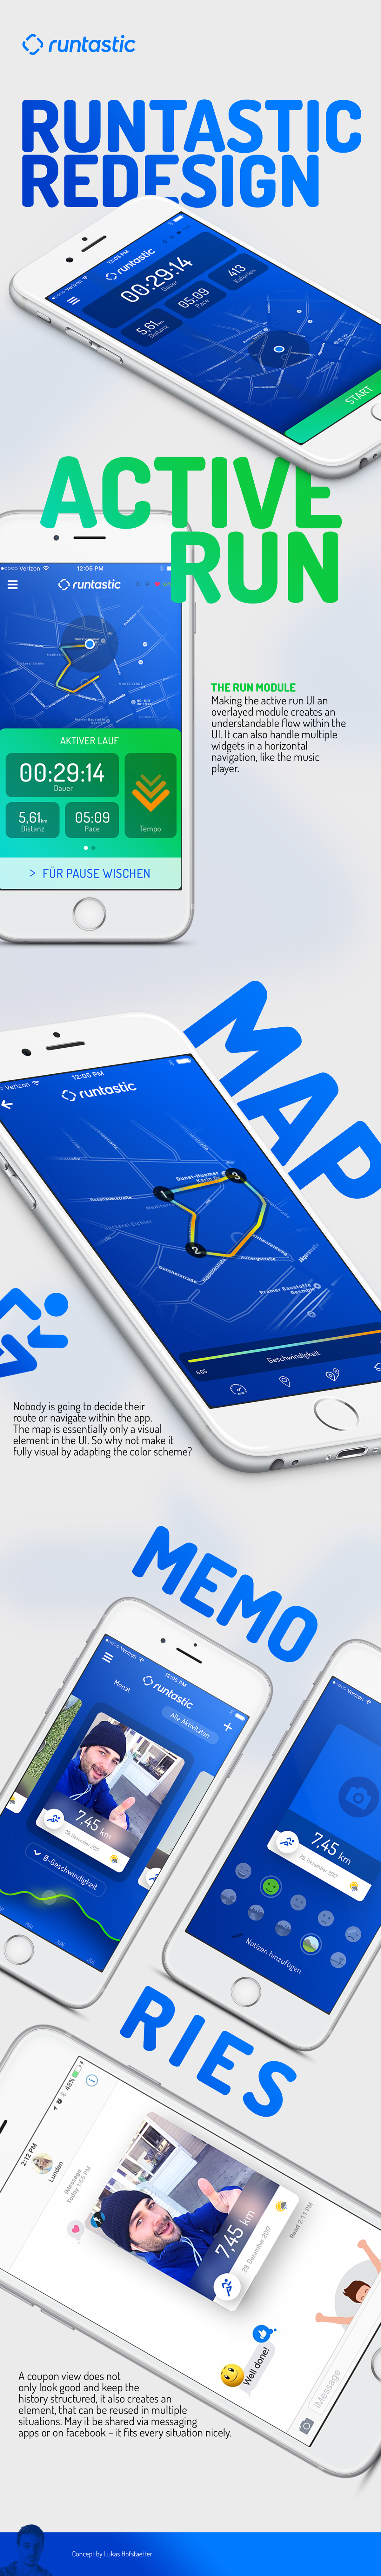 runtastic app redesign typography   attempt styling  blue